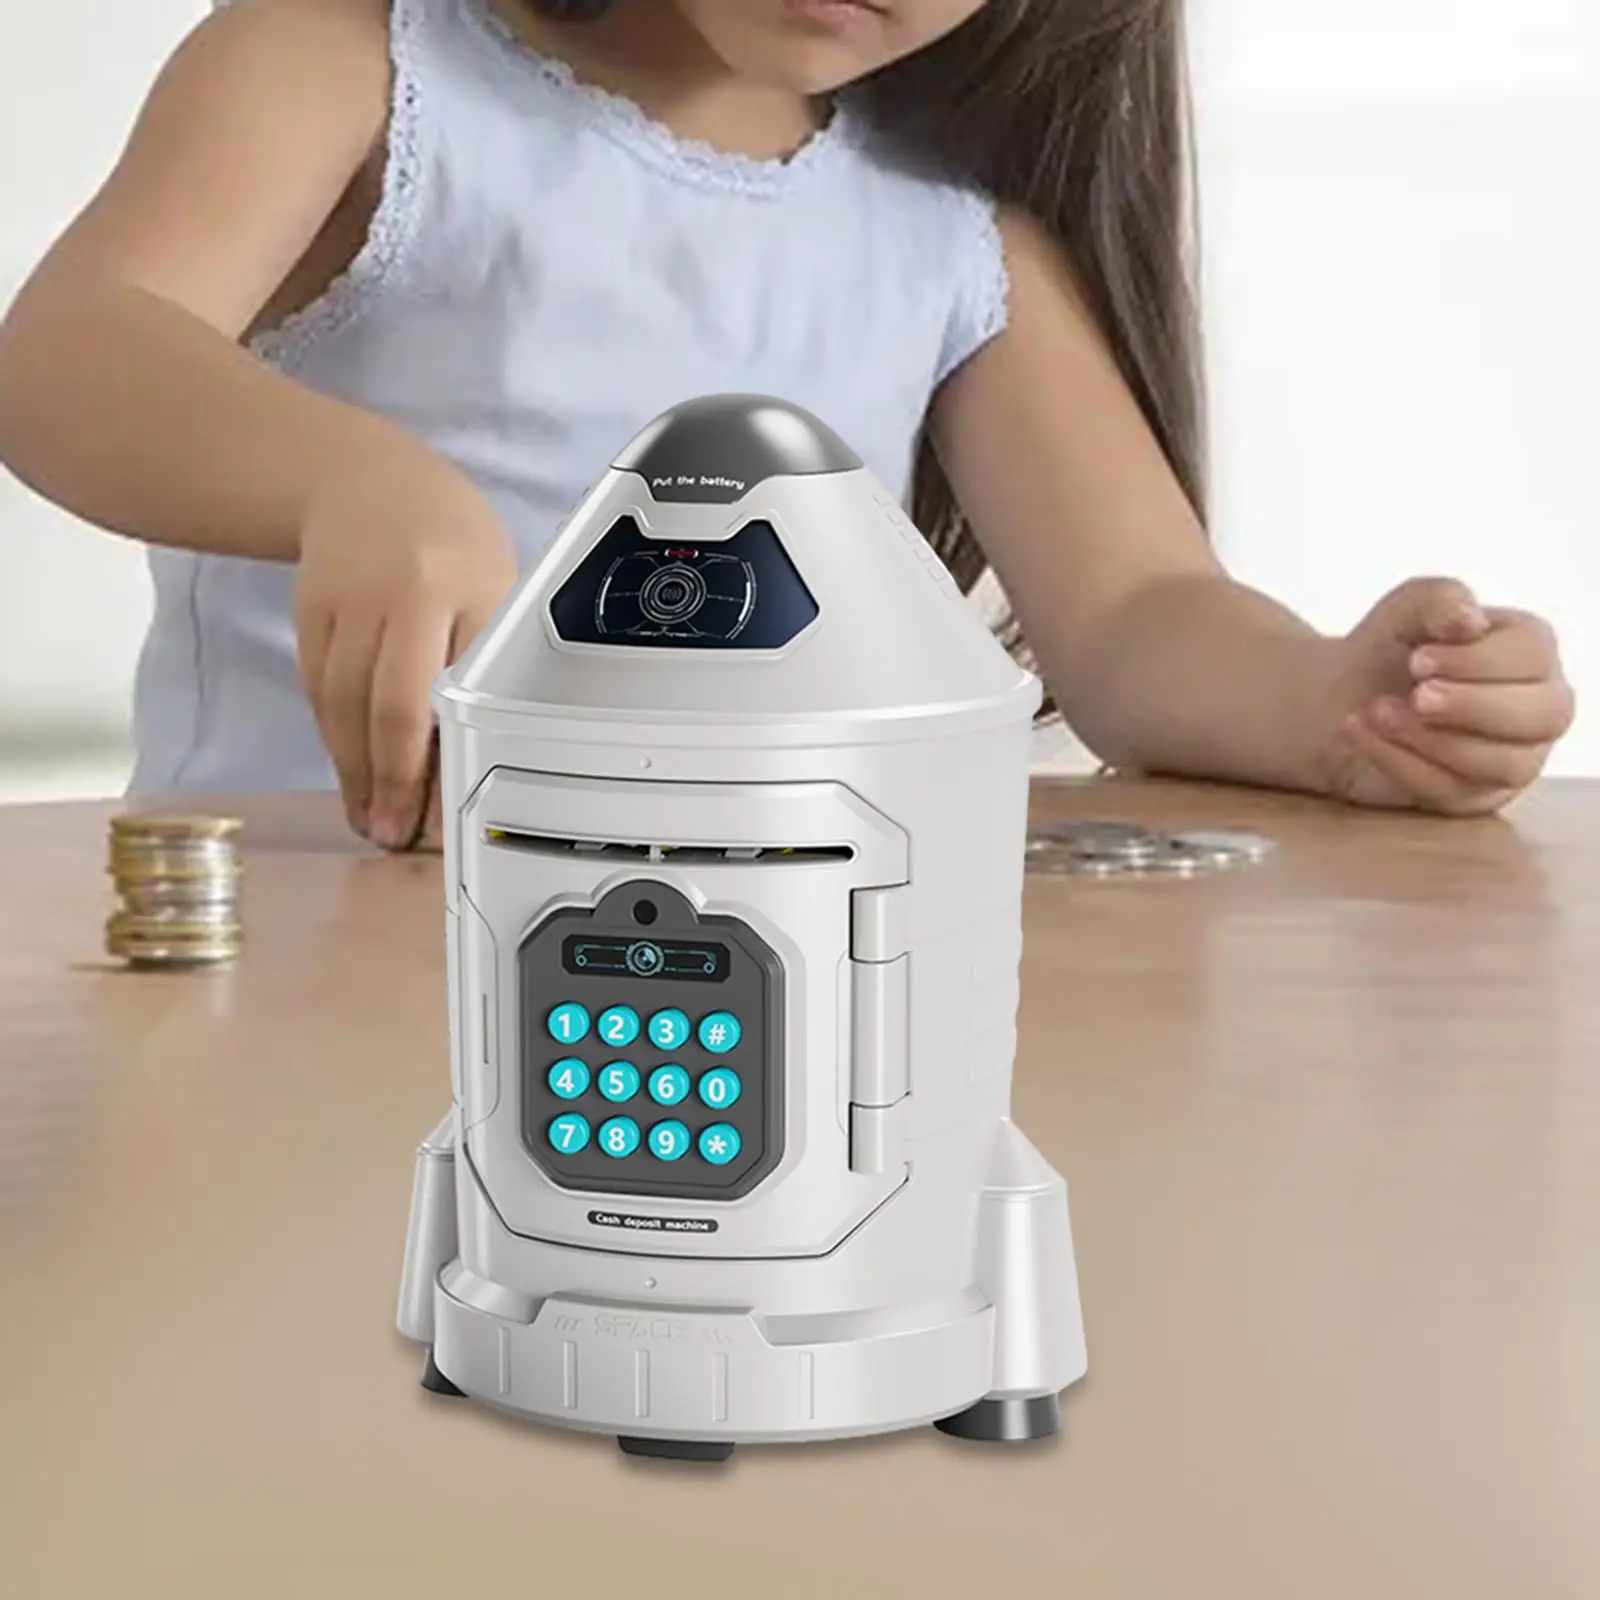 Rocket Piggy Bank Birthday Gifts Early Learning Money Bank Electronic Atm Savings Machine for Age 3-8 Years Kids Boys Girls